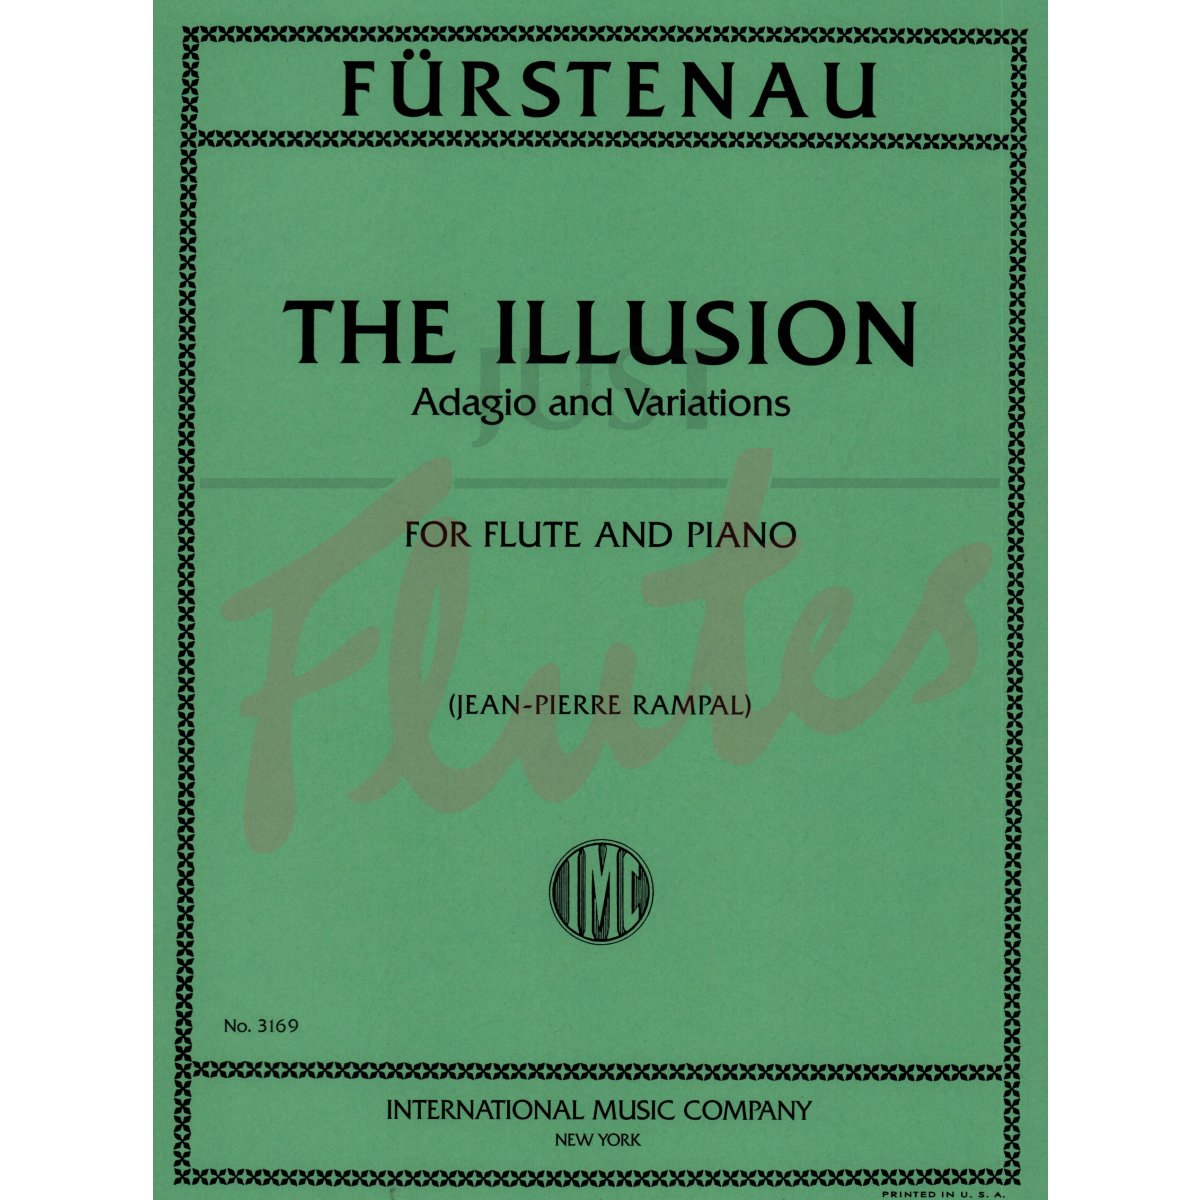 The Illusion: Adagio with Variations for Flute and Piano